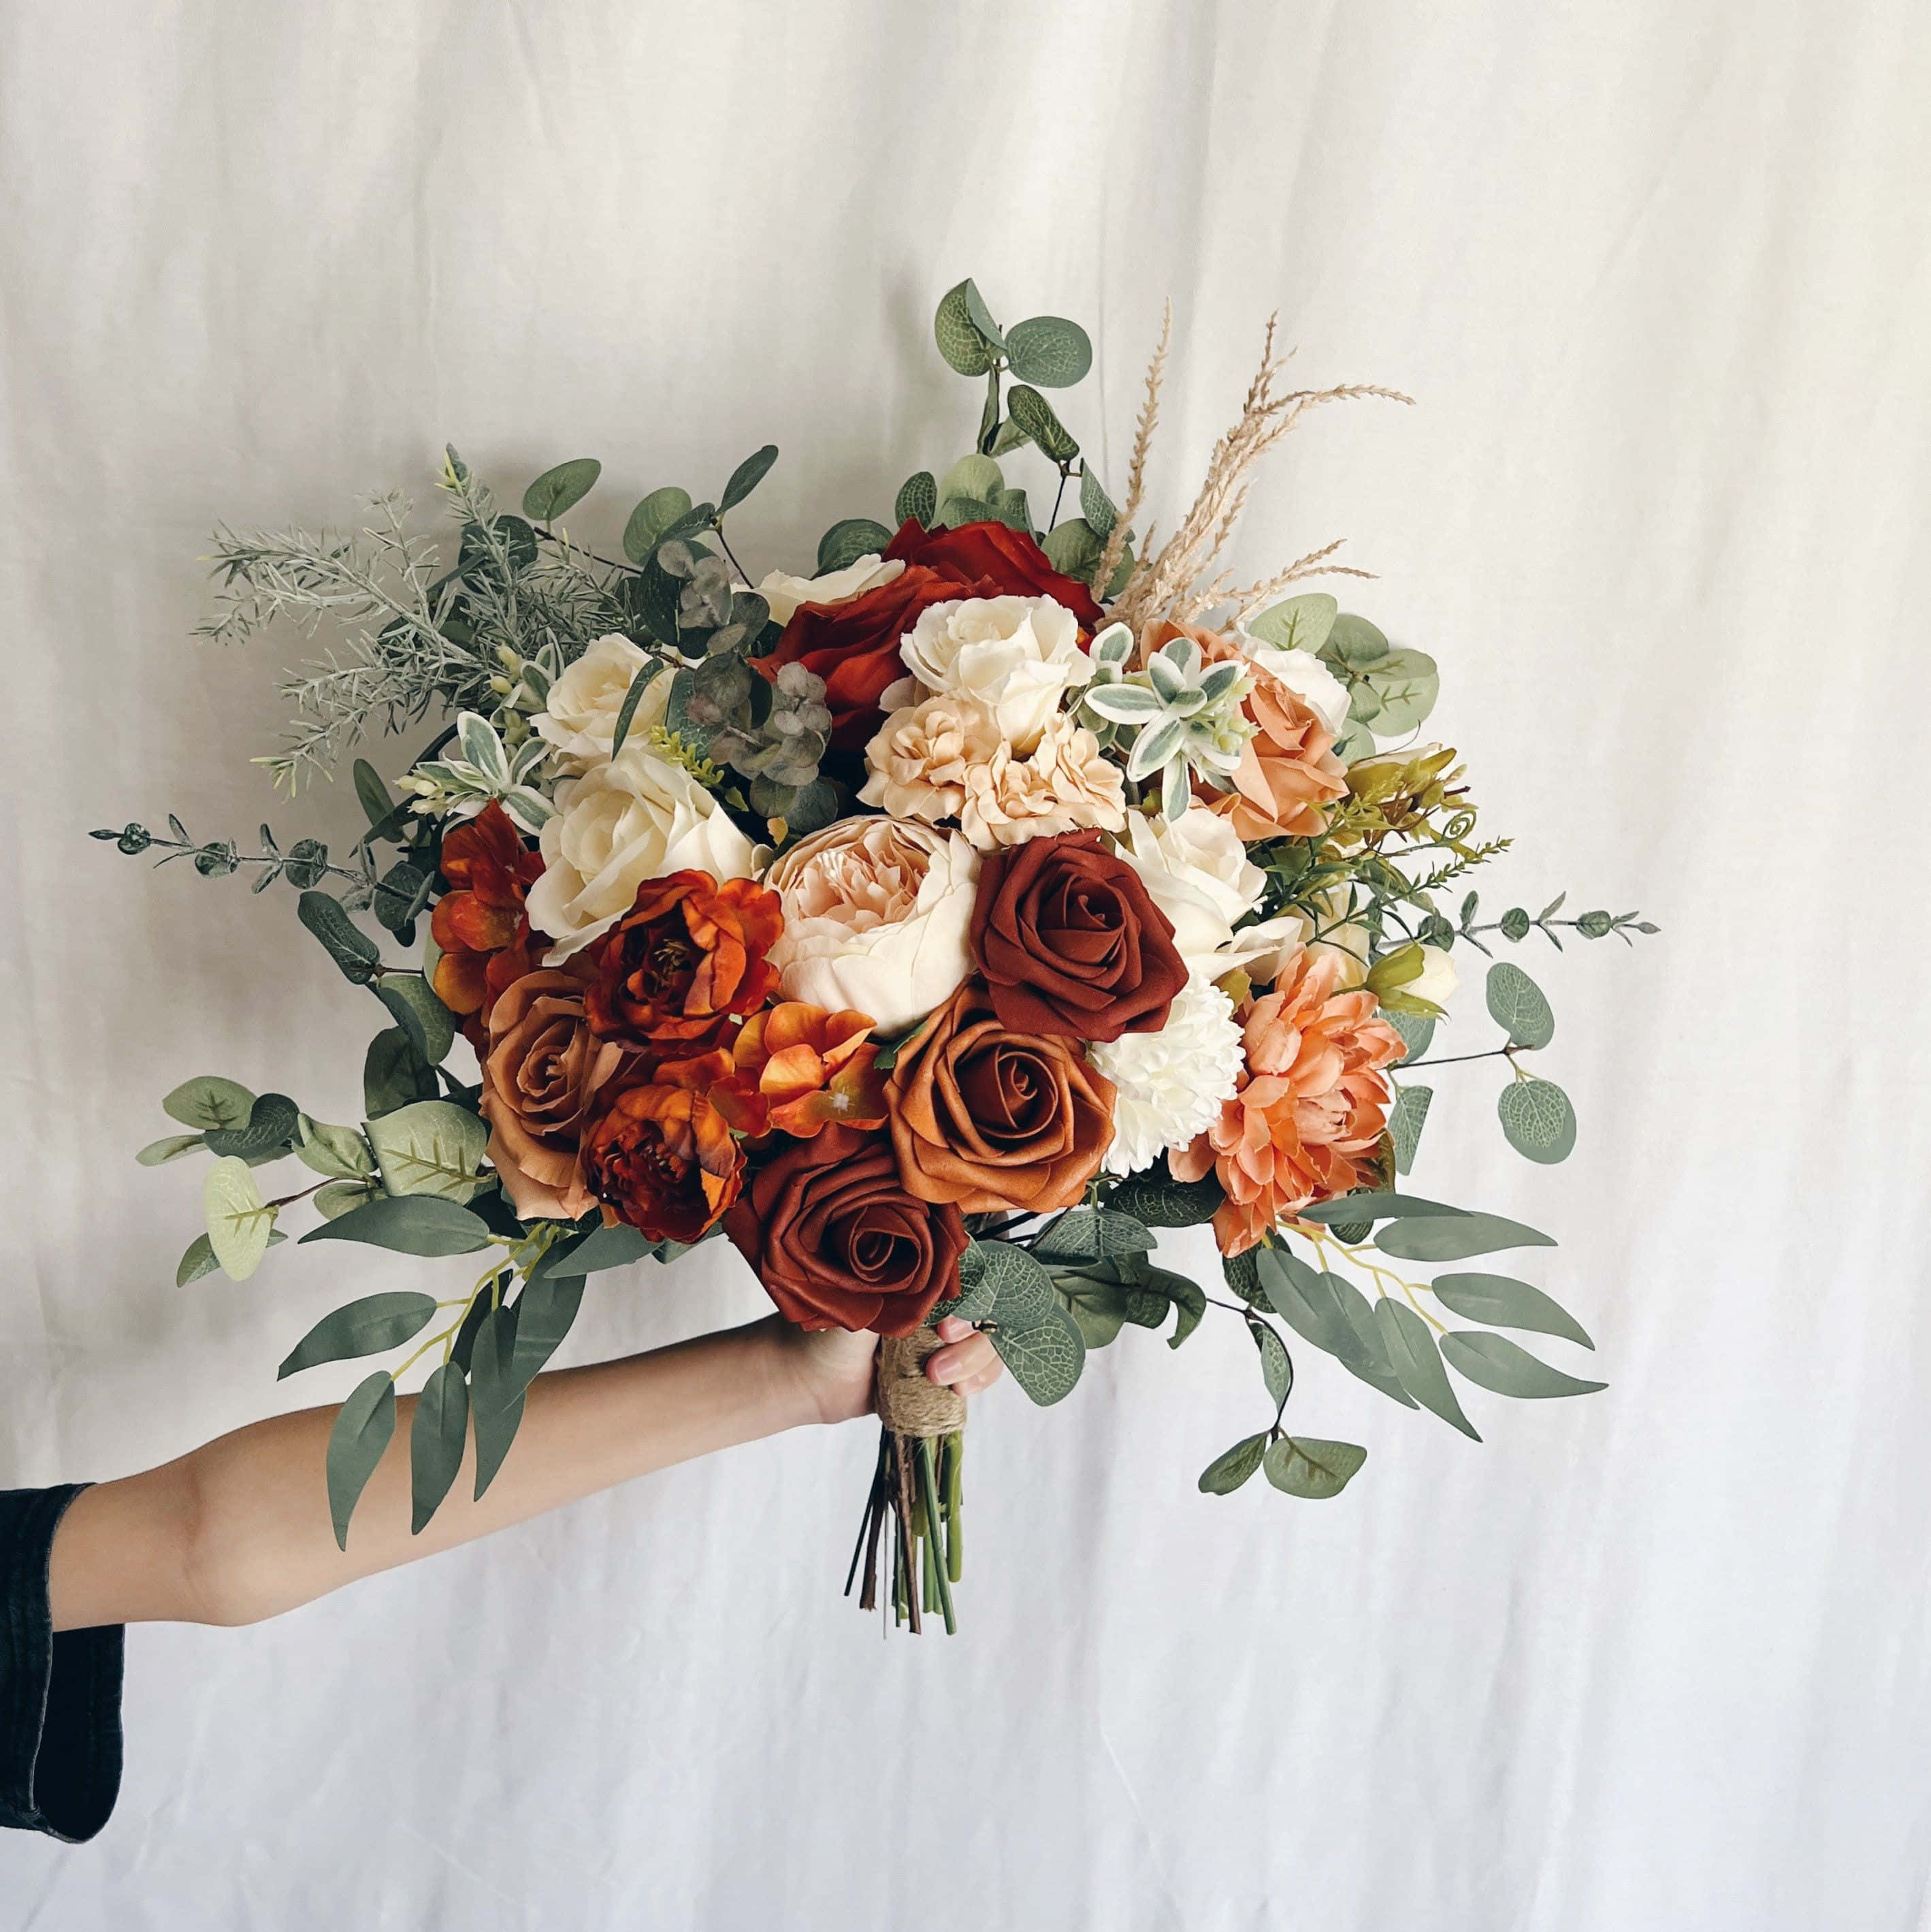 "An Assortment of Beautiful Flowers Skillfully Arranged into a Stunning Bouquet"